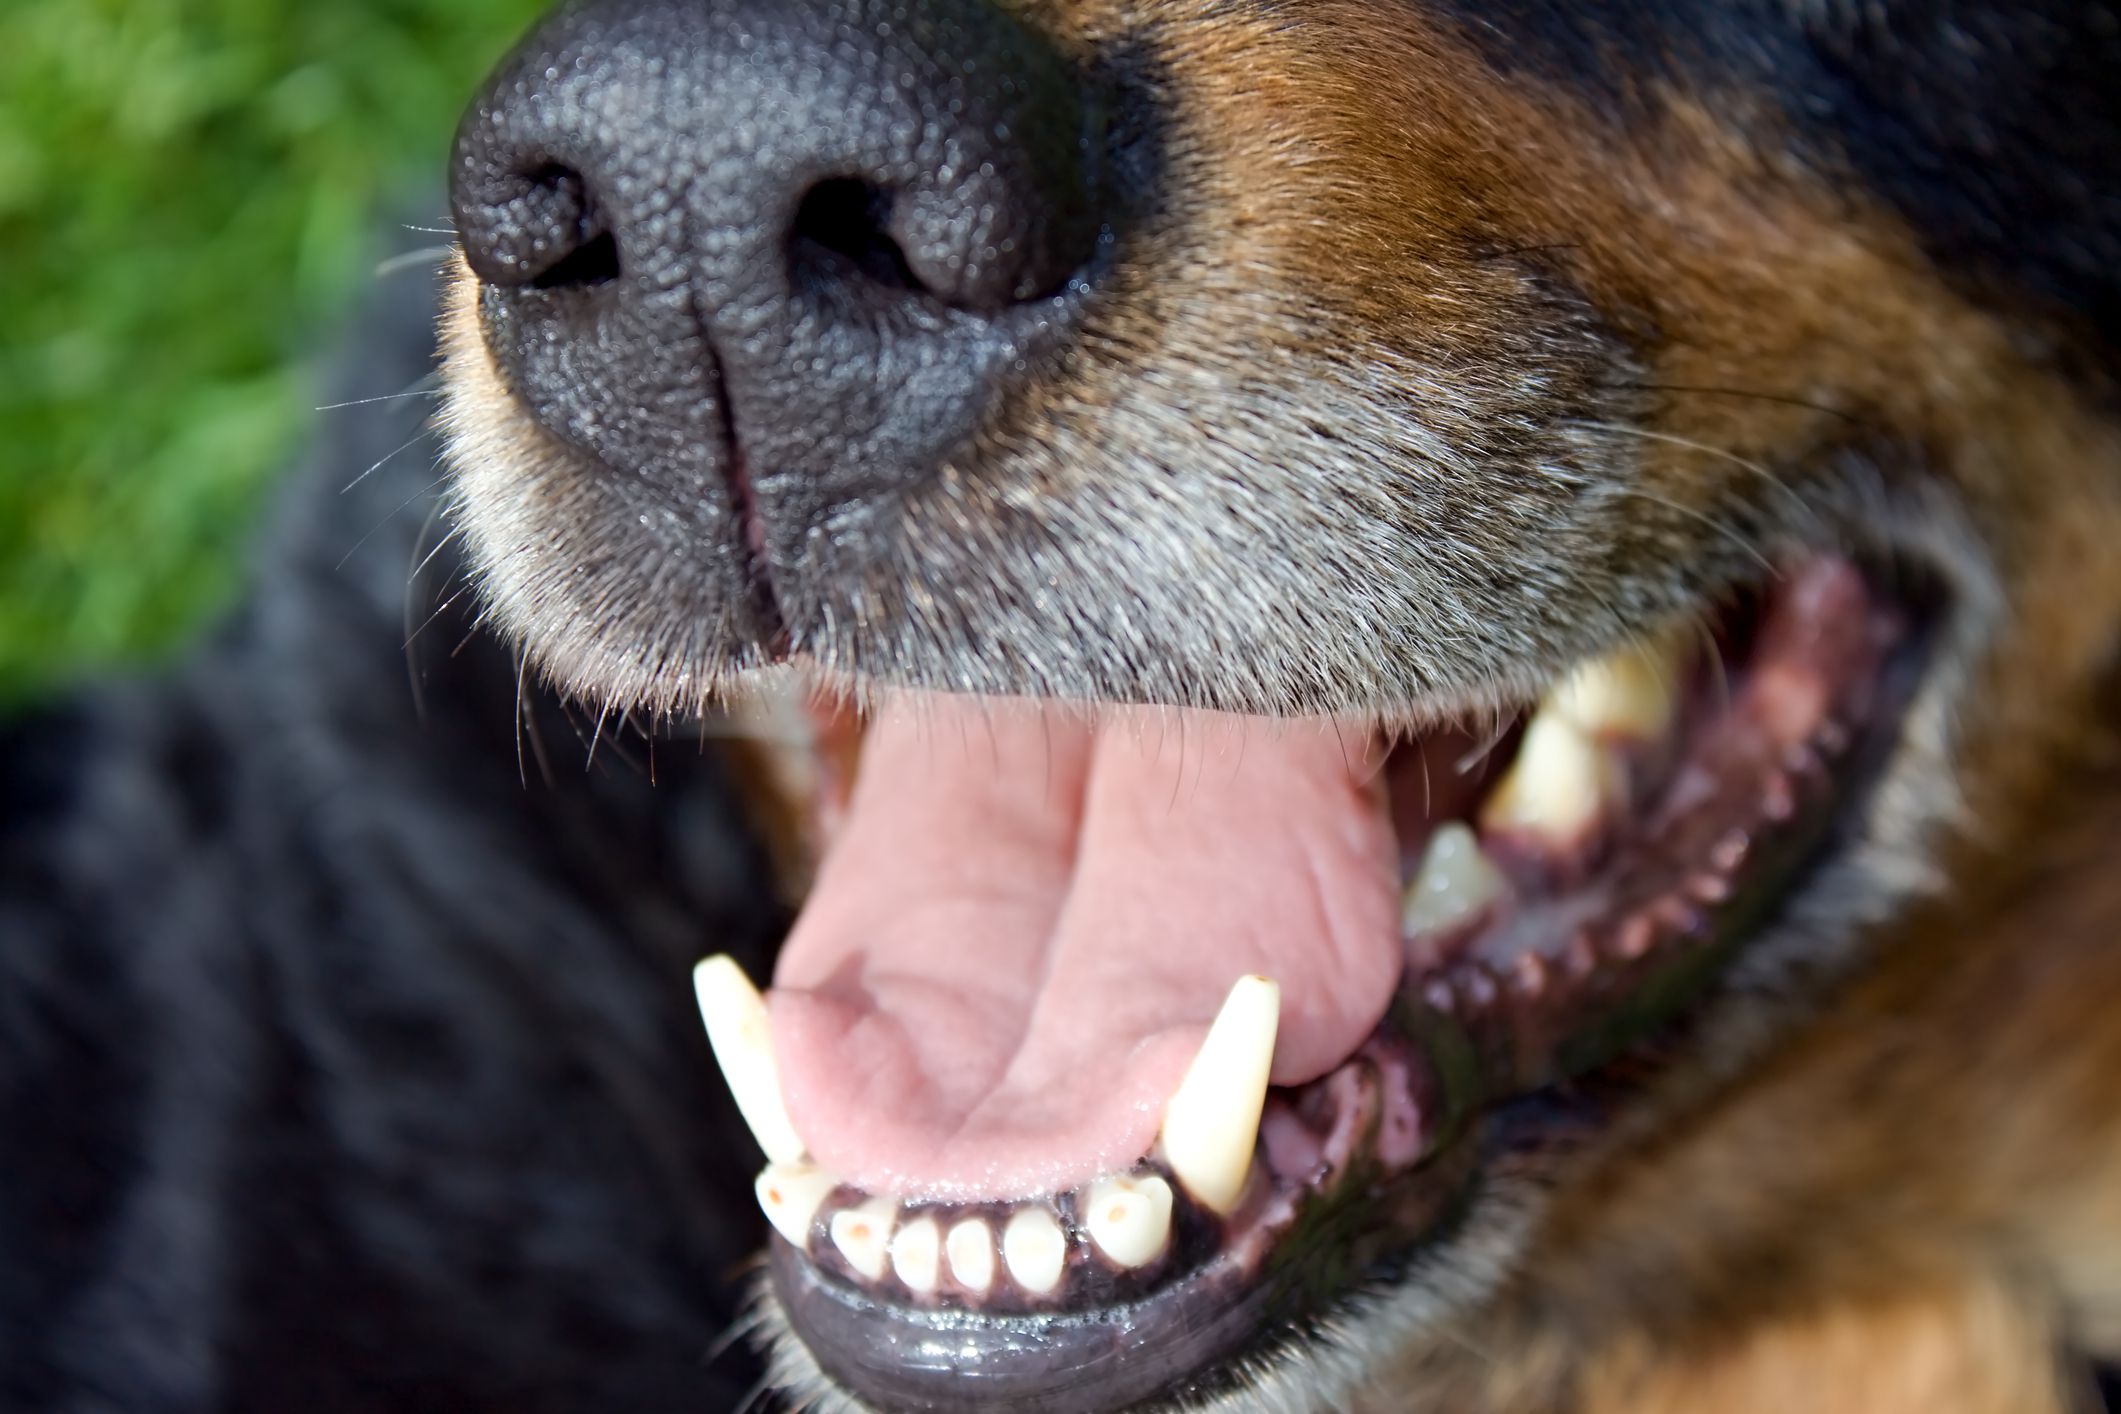 What Does Cancer Look Like In A Dog's Mouth